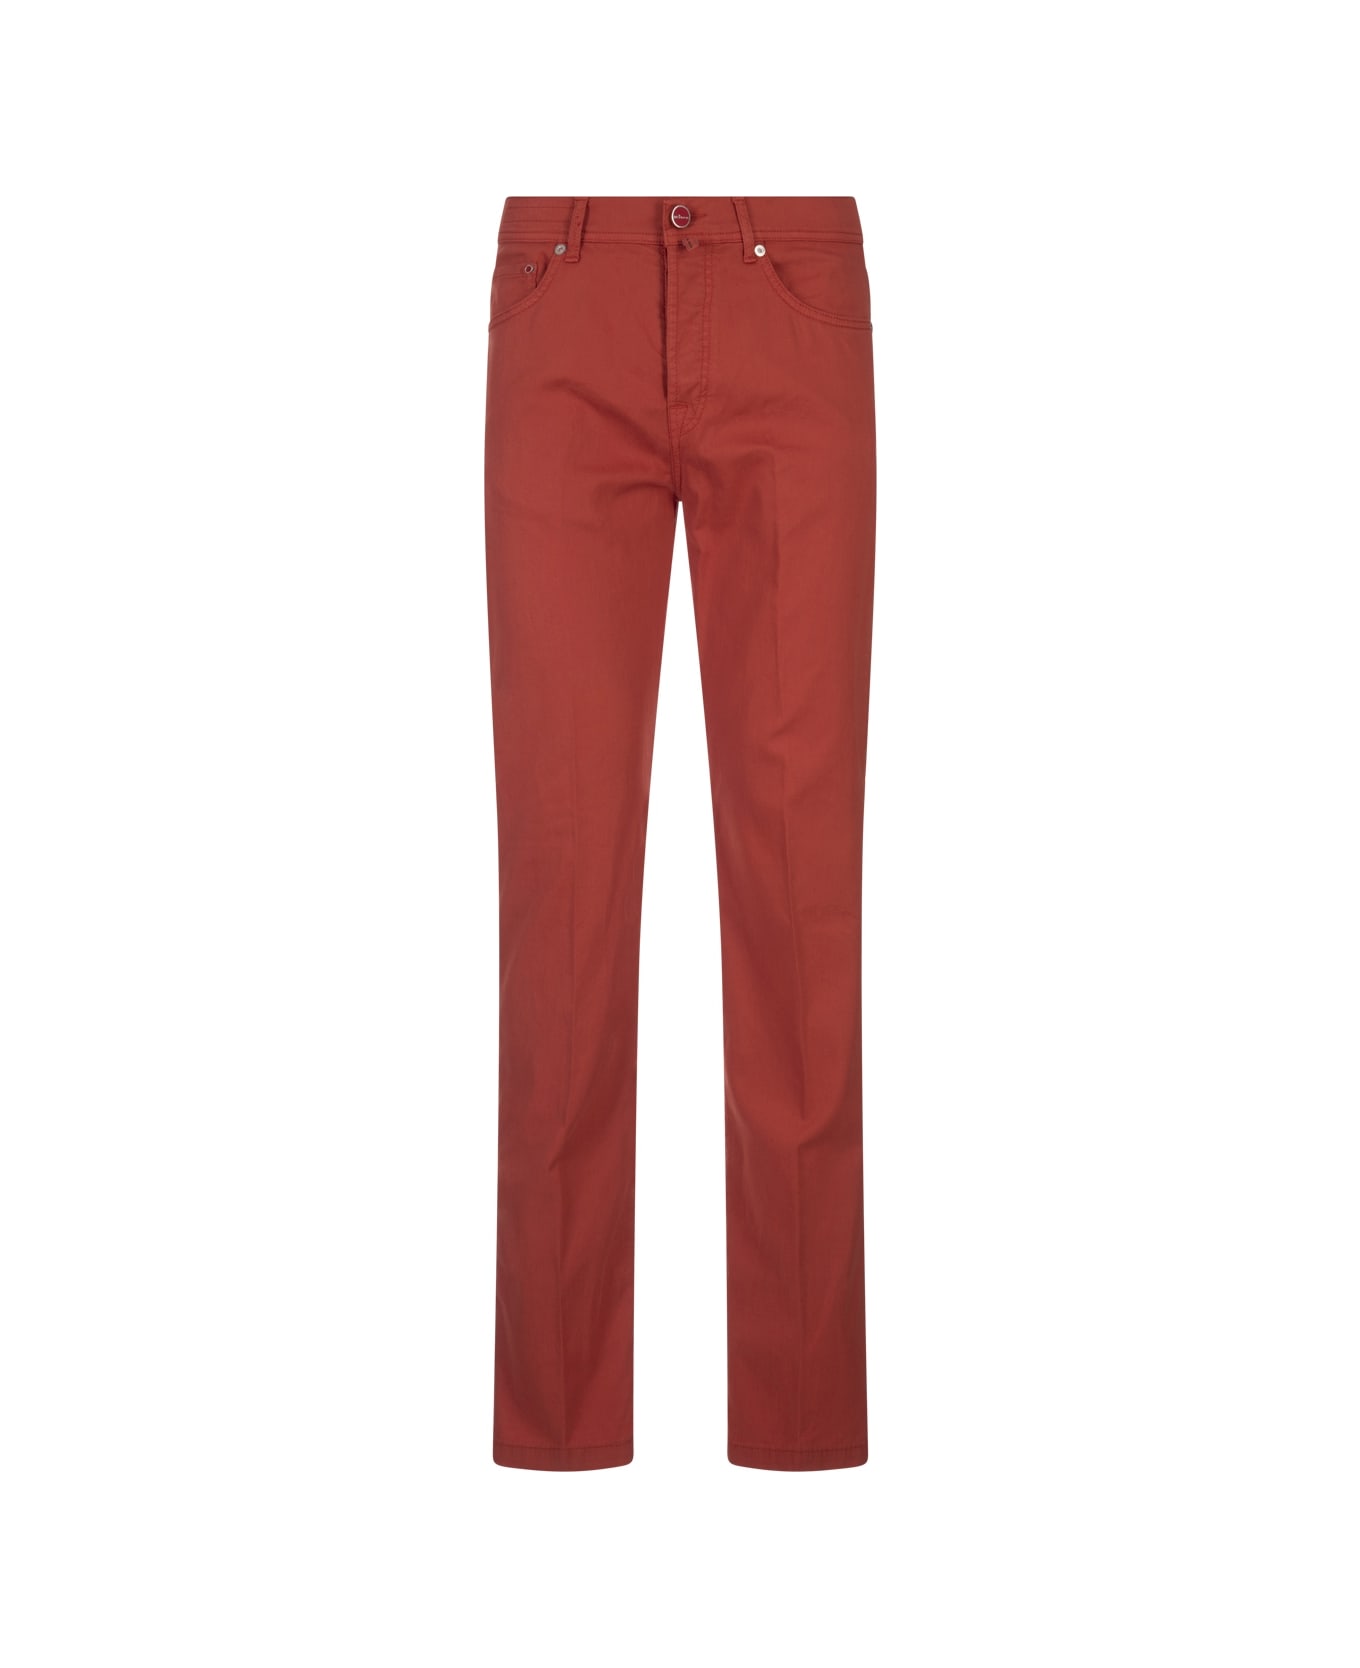 Kiton Red 5 Pocket Straight Leg Trousers - Red